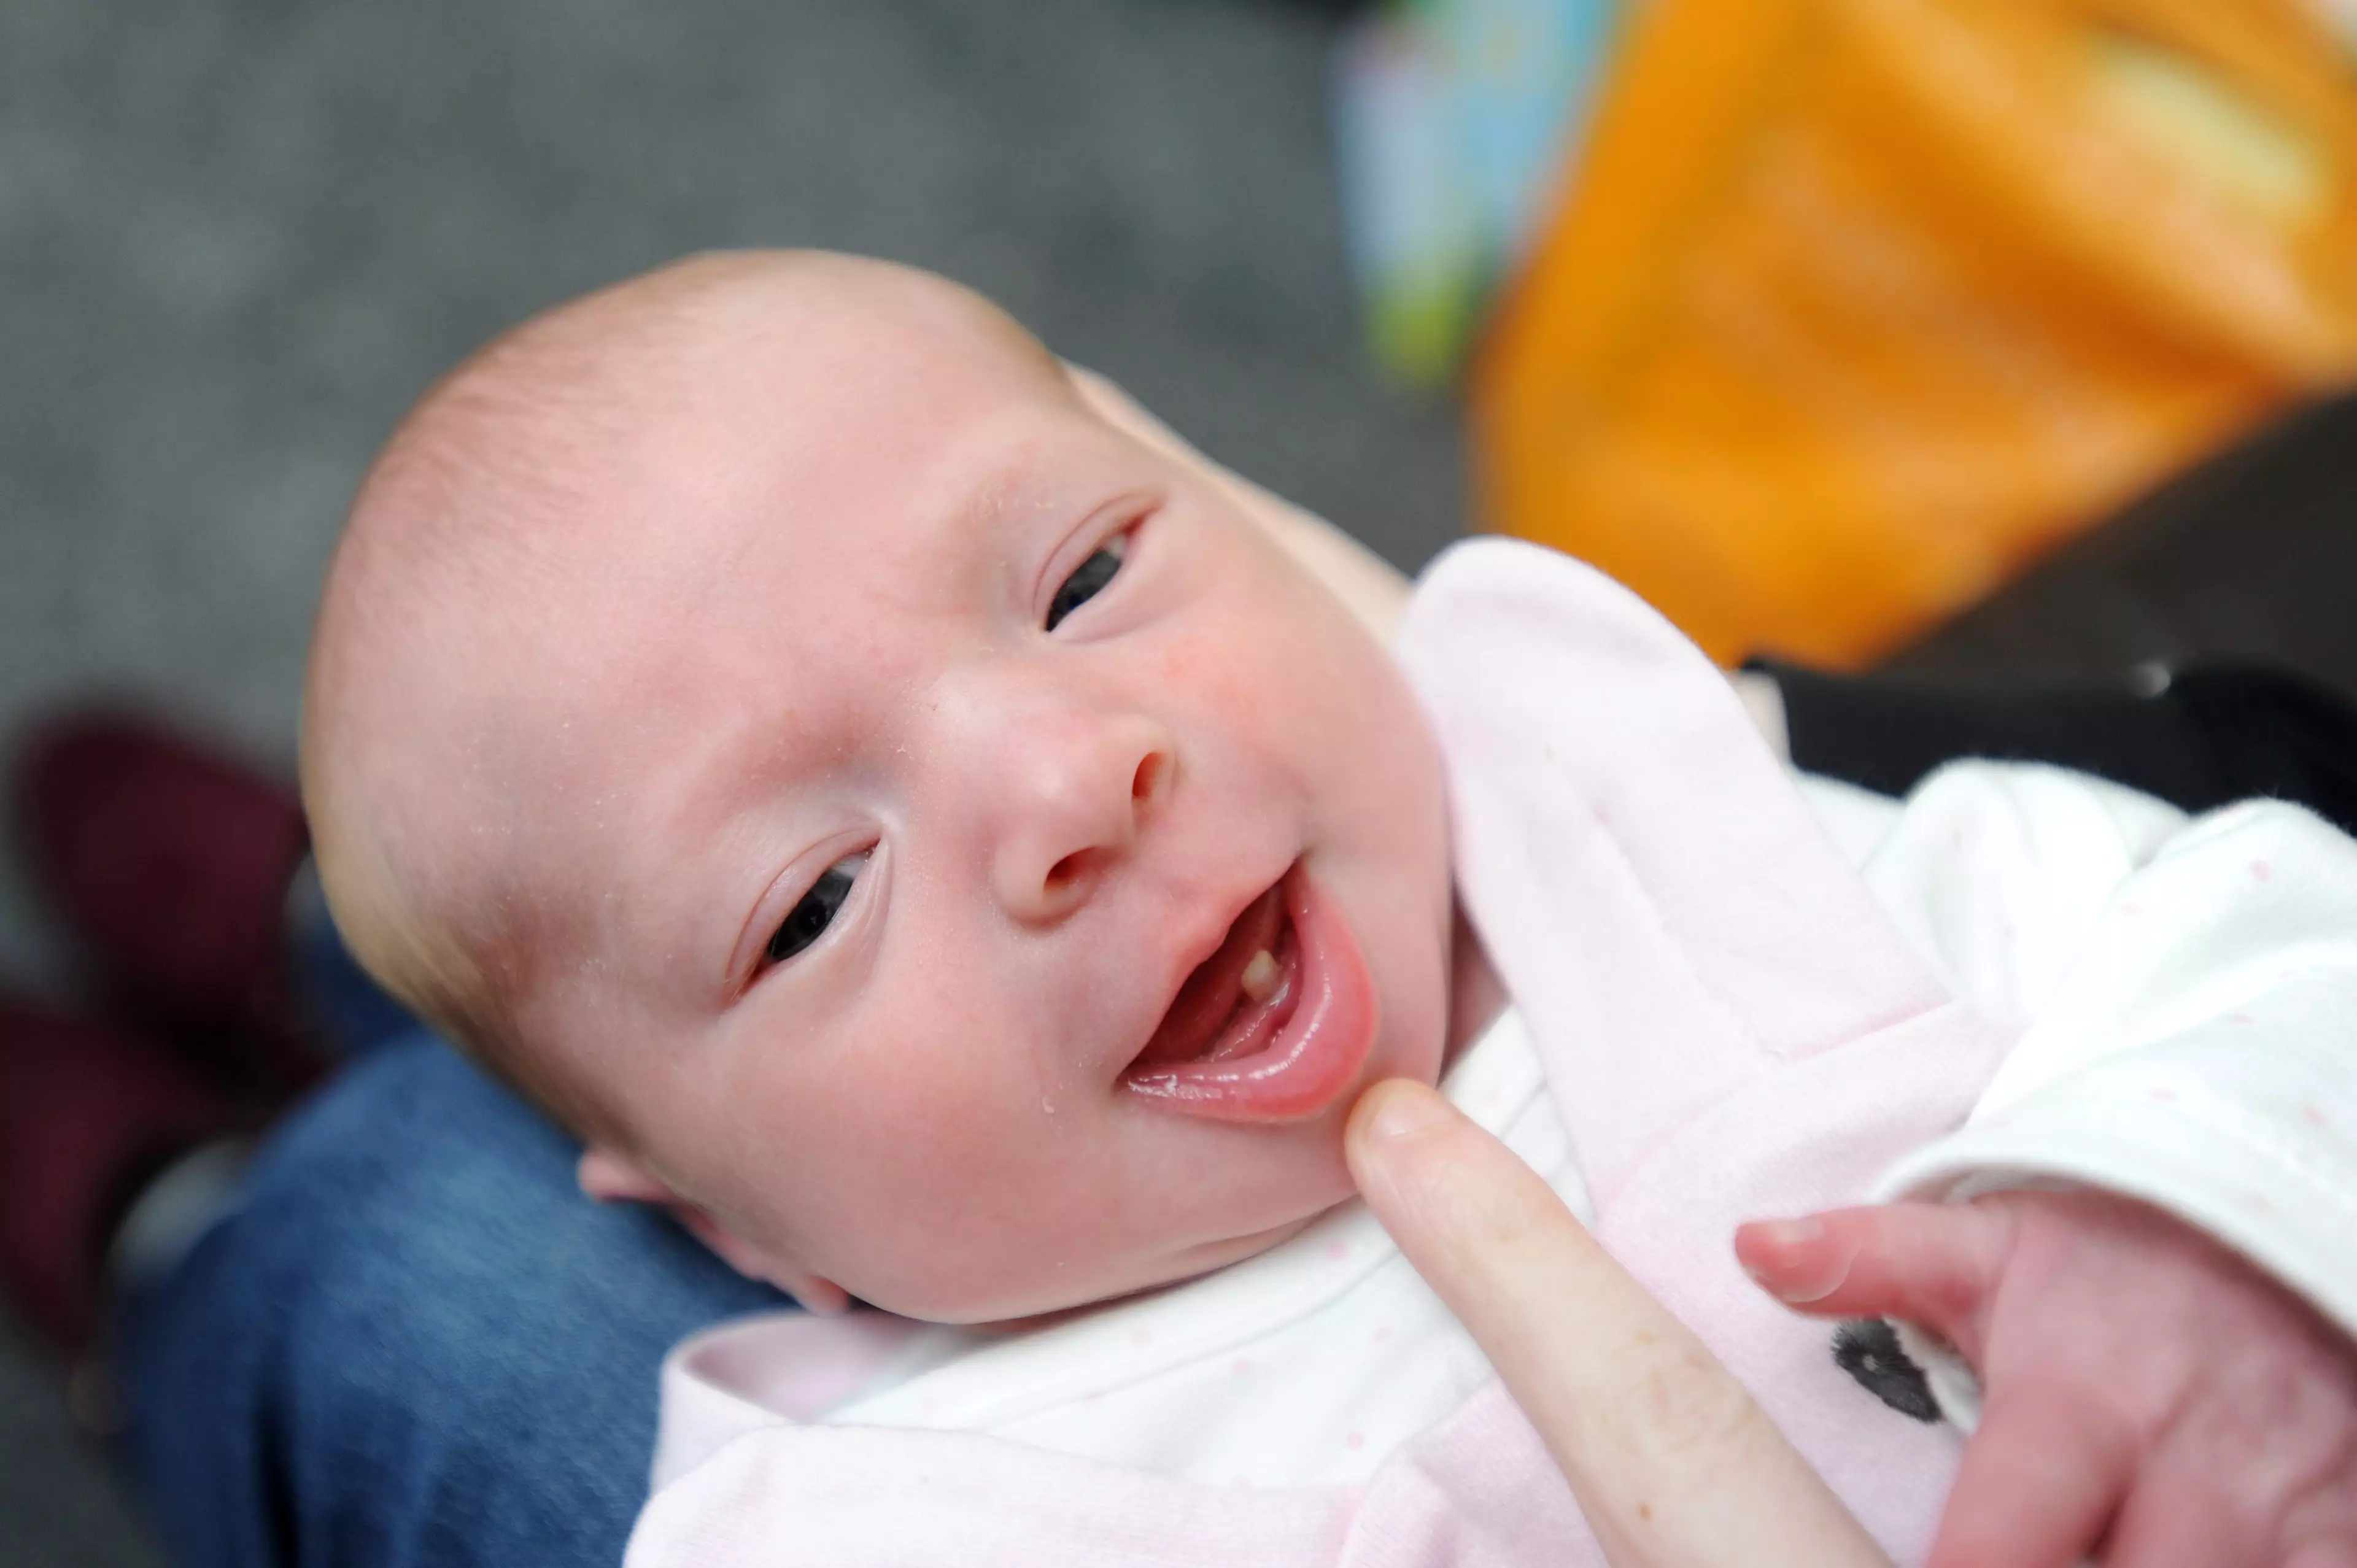 One in every 2,000 babies is born with natal teeth.